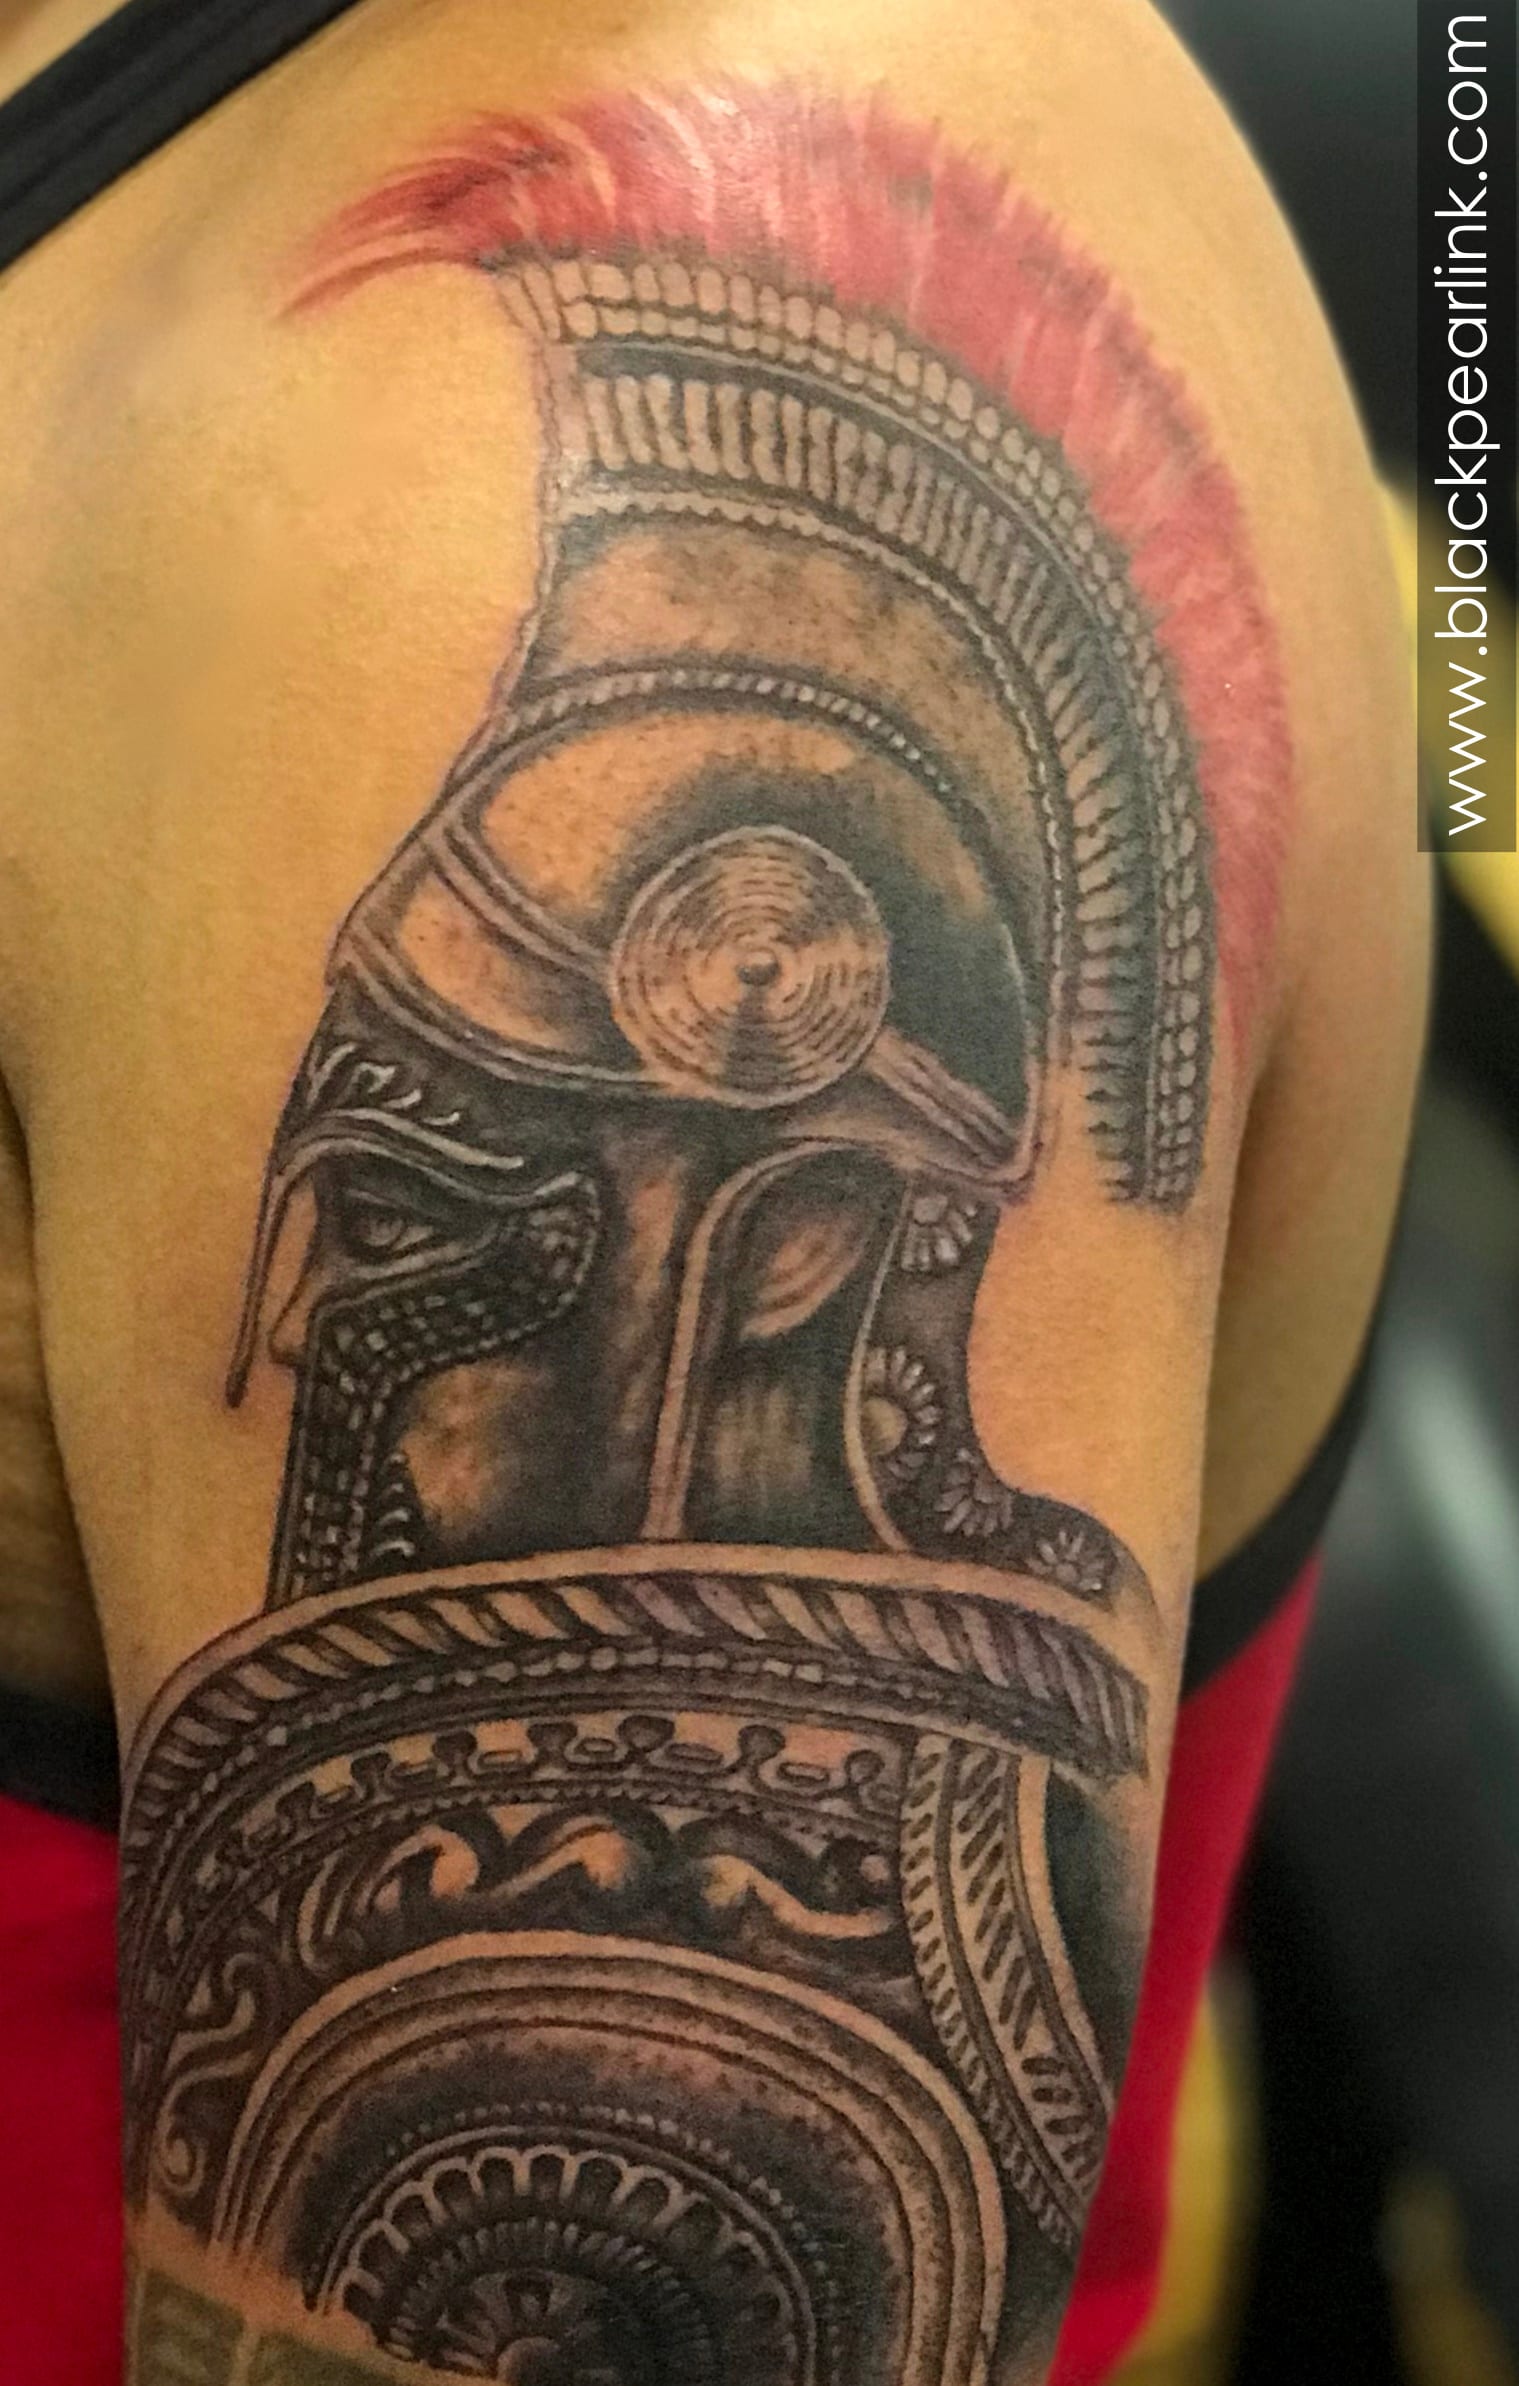 Armpit tattoos: The secret to beautiful armpits | The Times of India